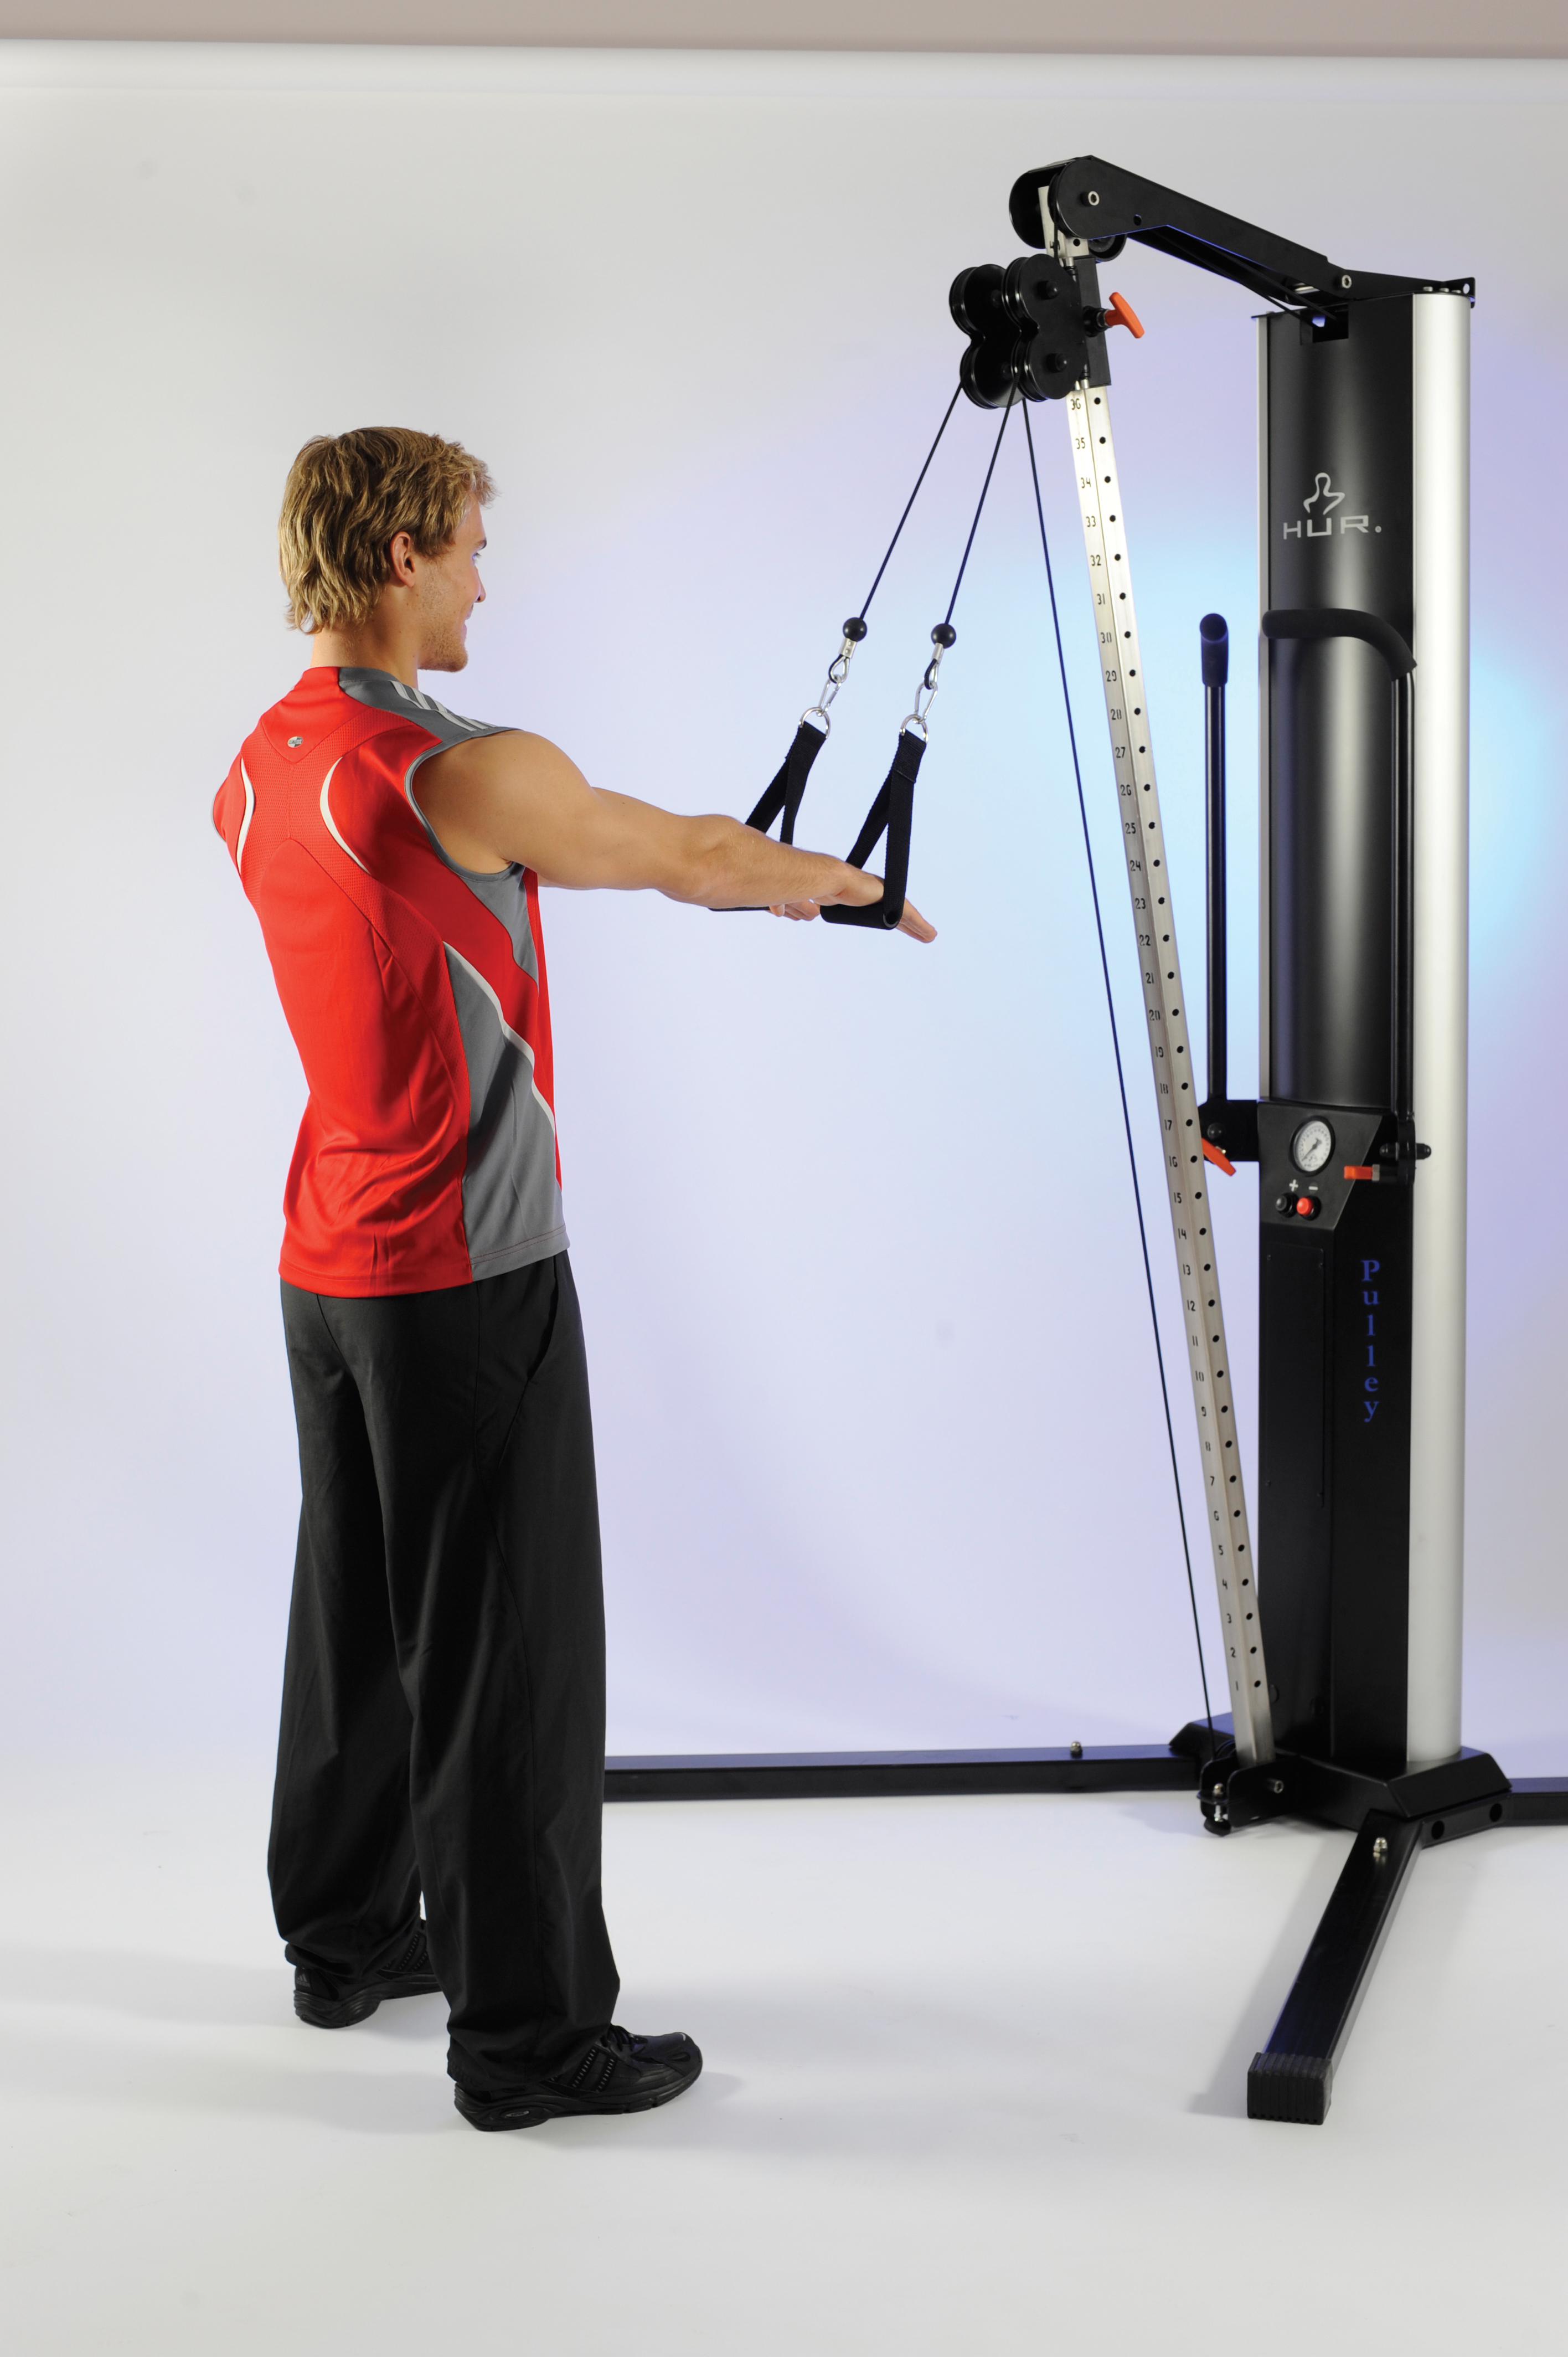 Simple Pulley workout machine with Comfort Workout Clothes